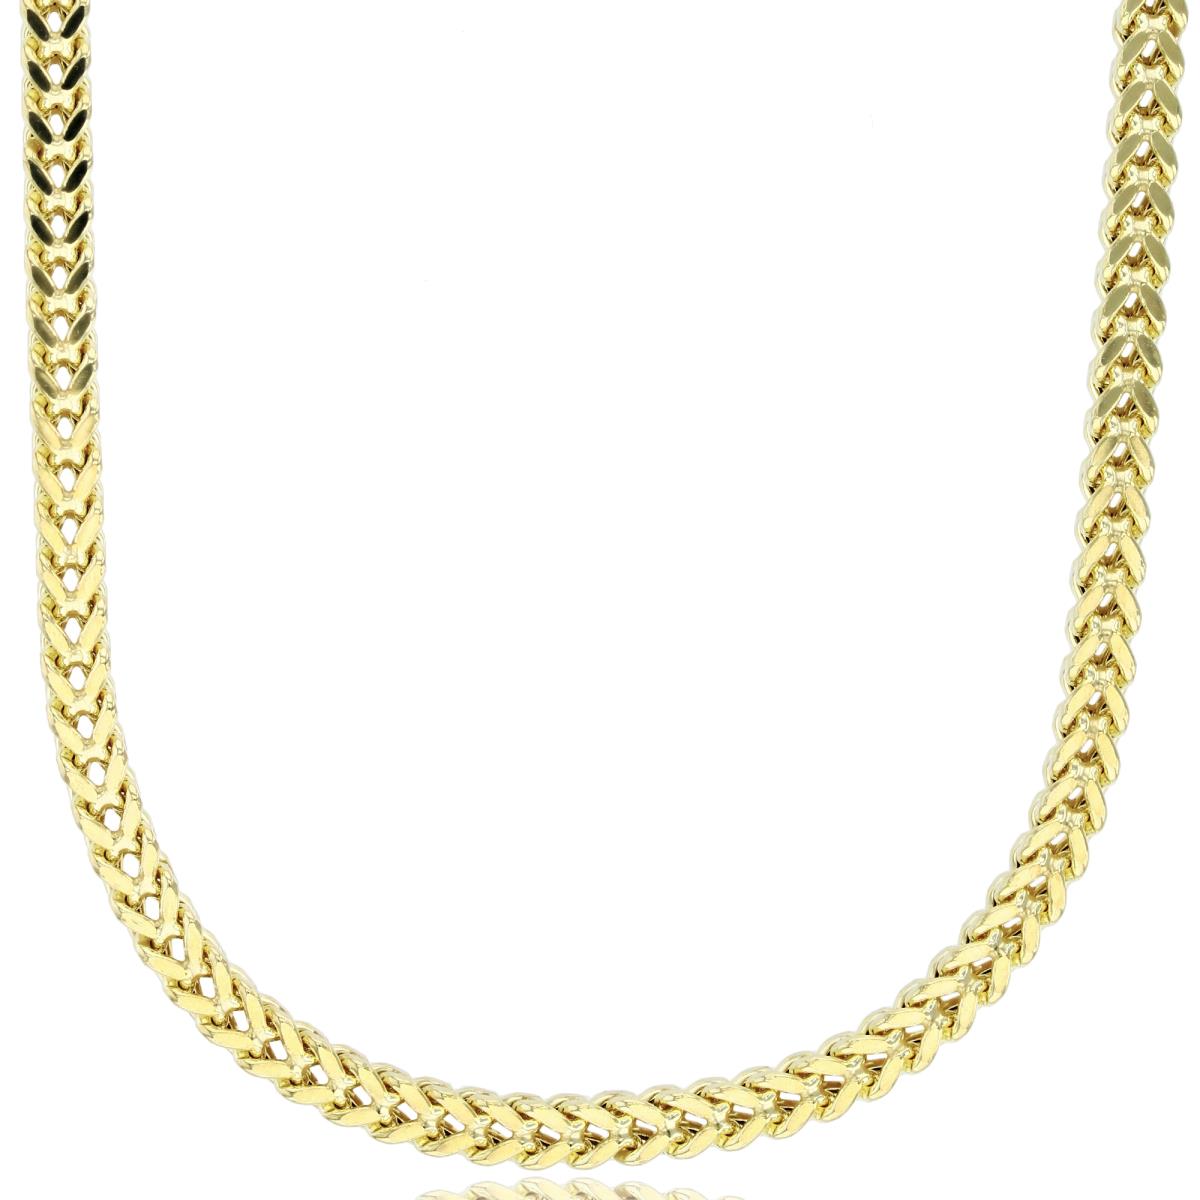 10K Yellow Gold 3.65mm 26" 090 Hollow Franco Chain